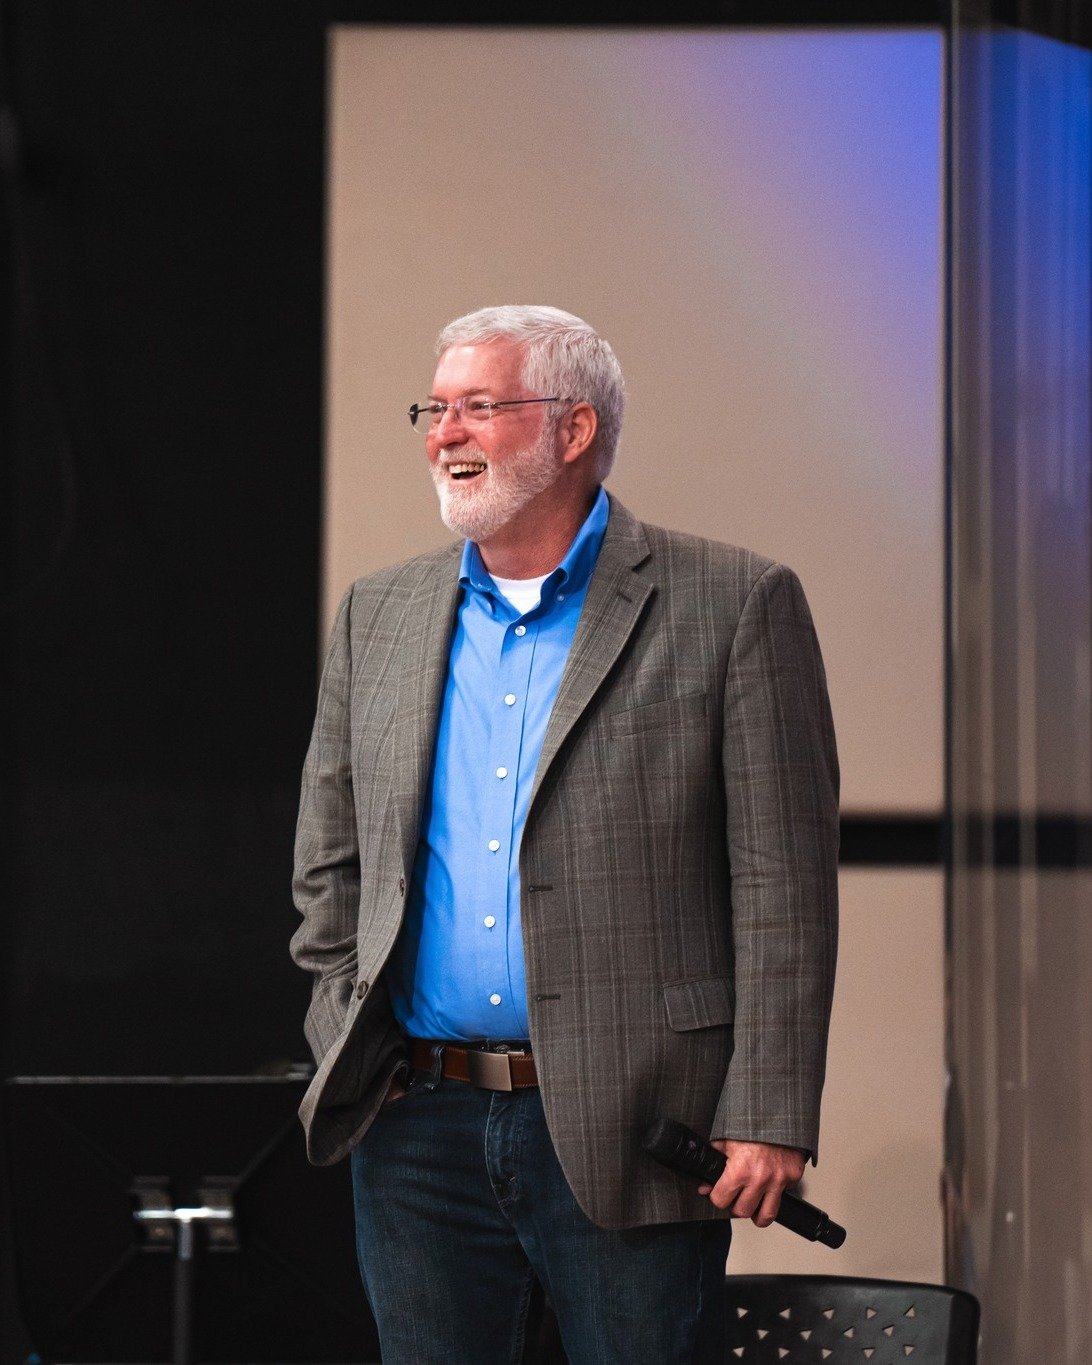 Many people know him from the stage at Family Worship Center, but did you know Brother Robin also helps out with our JSBC chapel services?

This year, Brother Robin Herd has stepped in as our worship leader for our chapel team. He has been an excelle